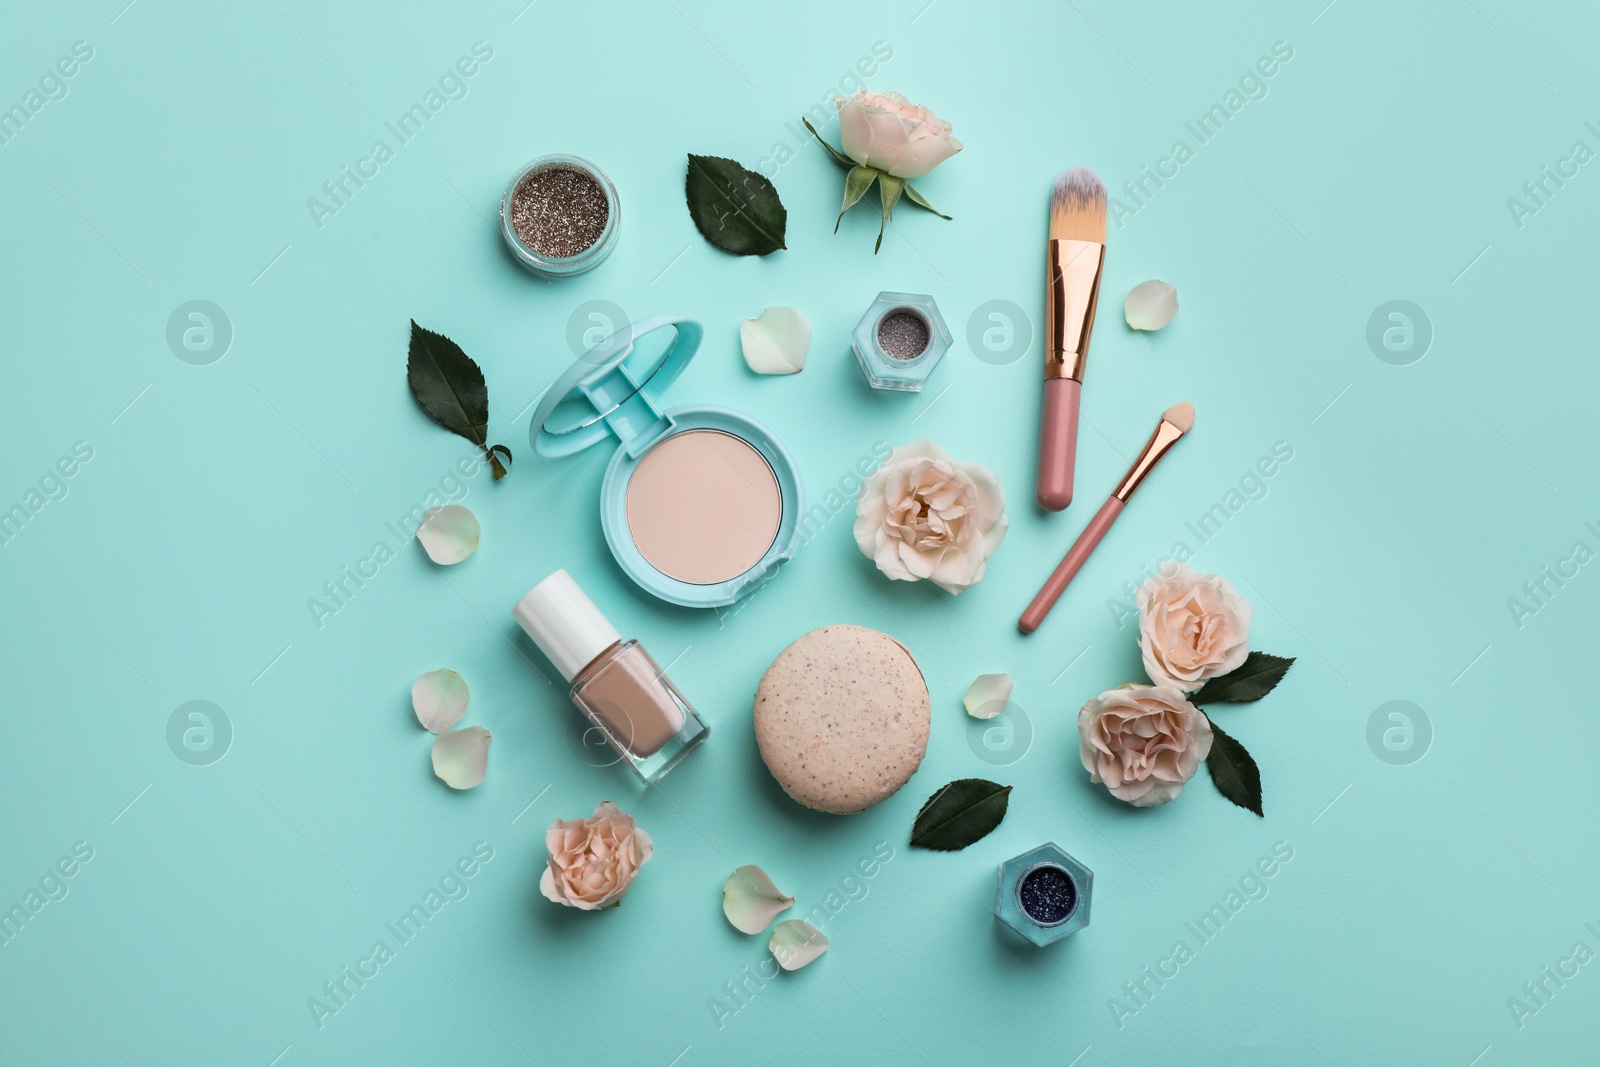 Photo of Flat lay composition with makeup products, roses and macaron on turquoise background